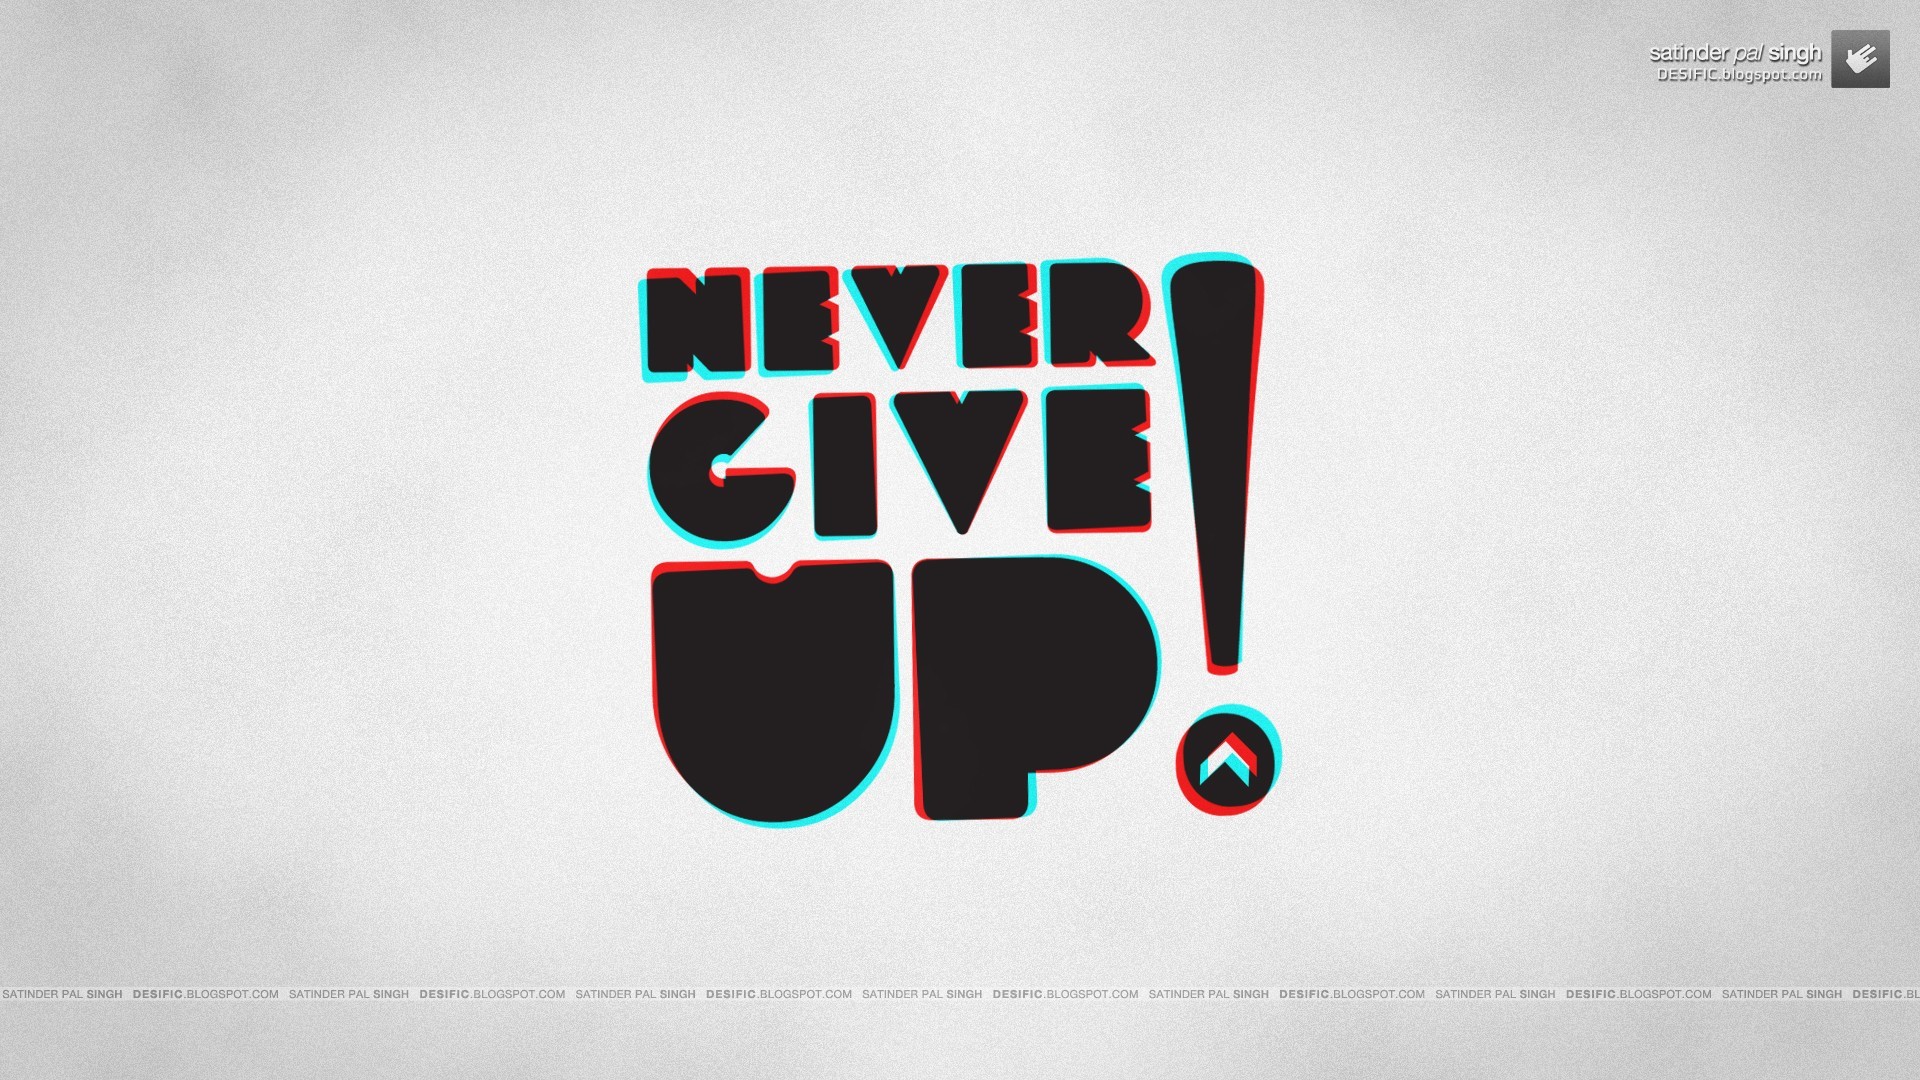 1920x1080 General  Never Give Up! typography anaglyph 3D motivational